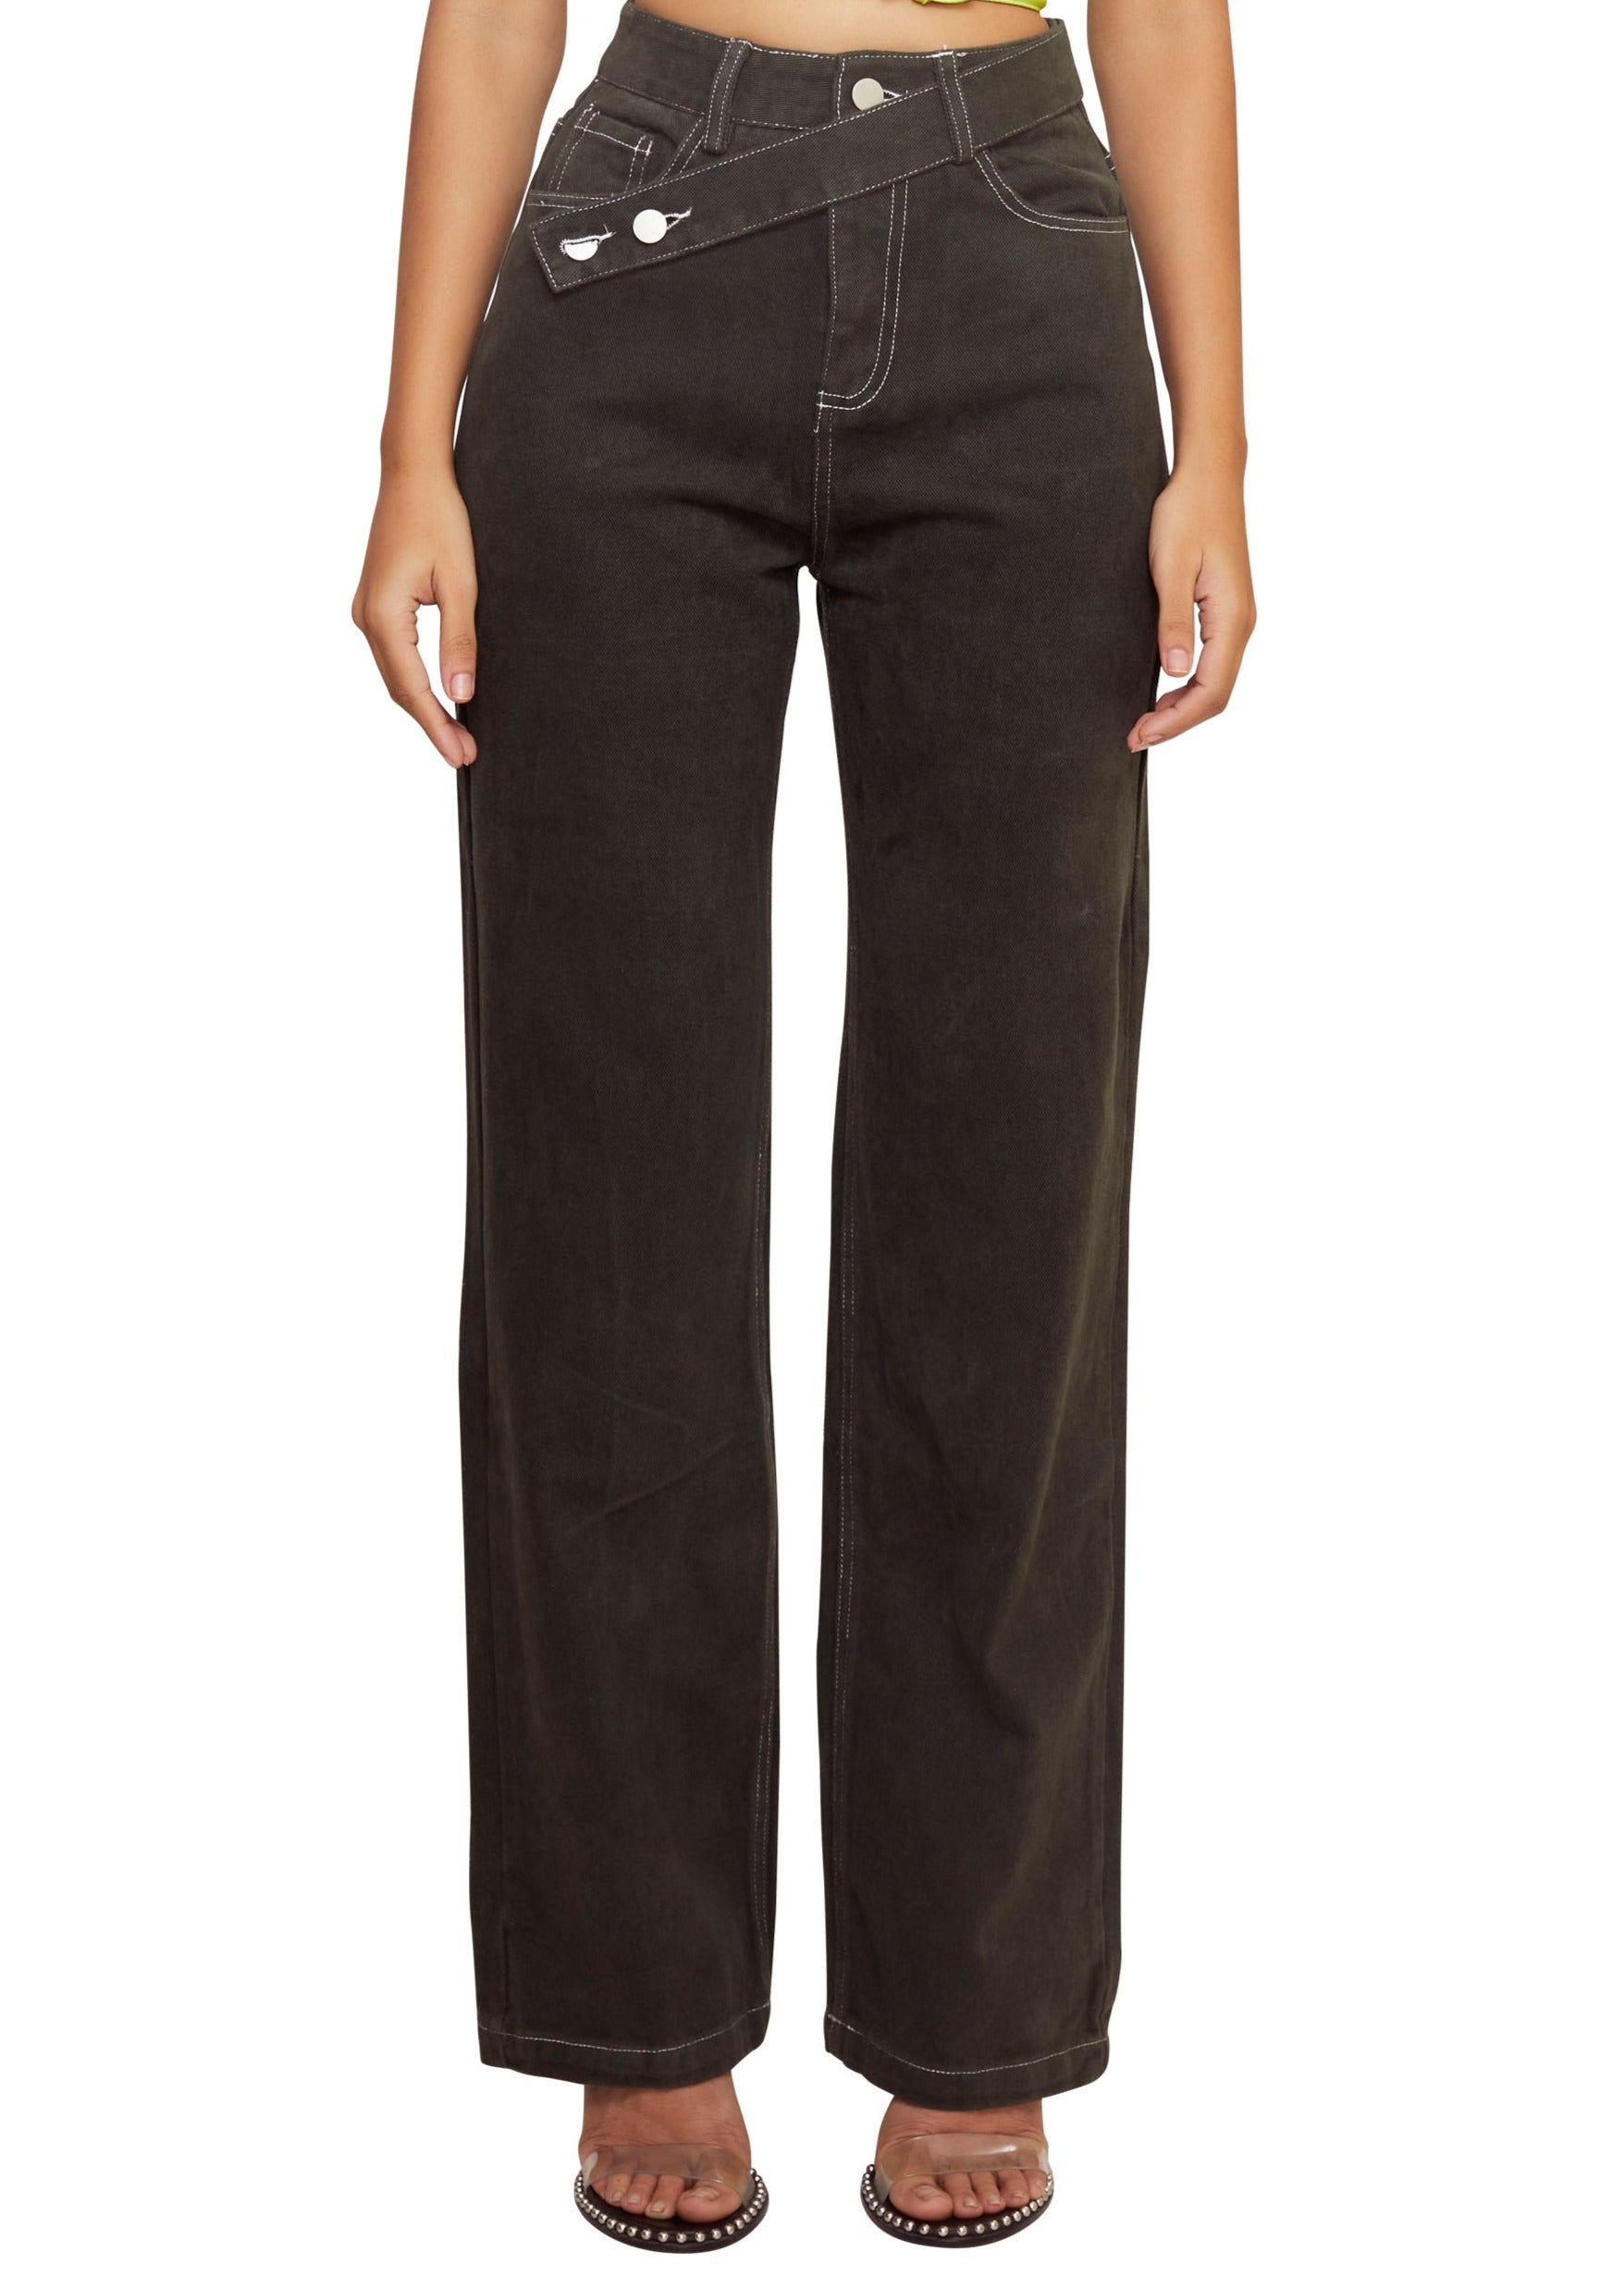 Black non-stretchy straight jeans from the brand The Kript